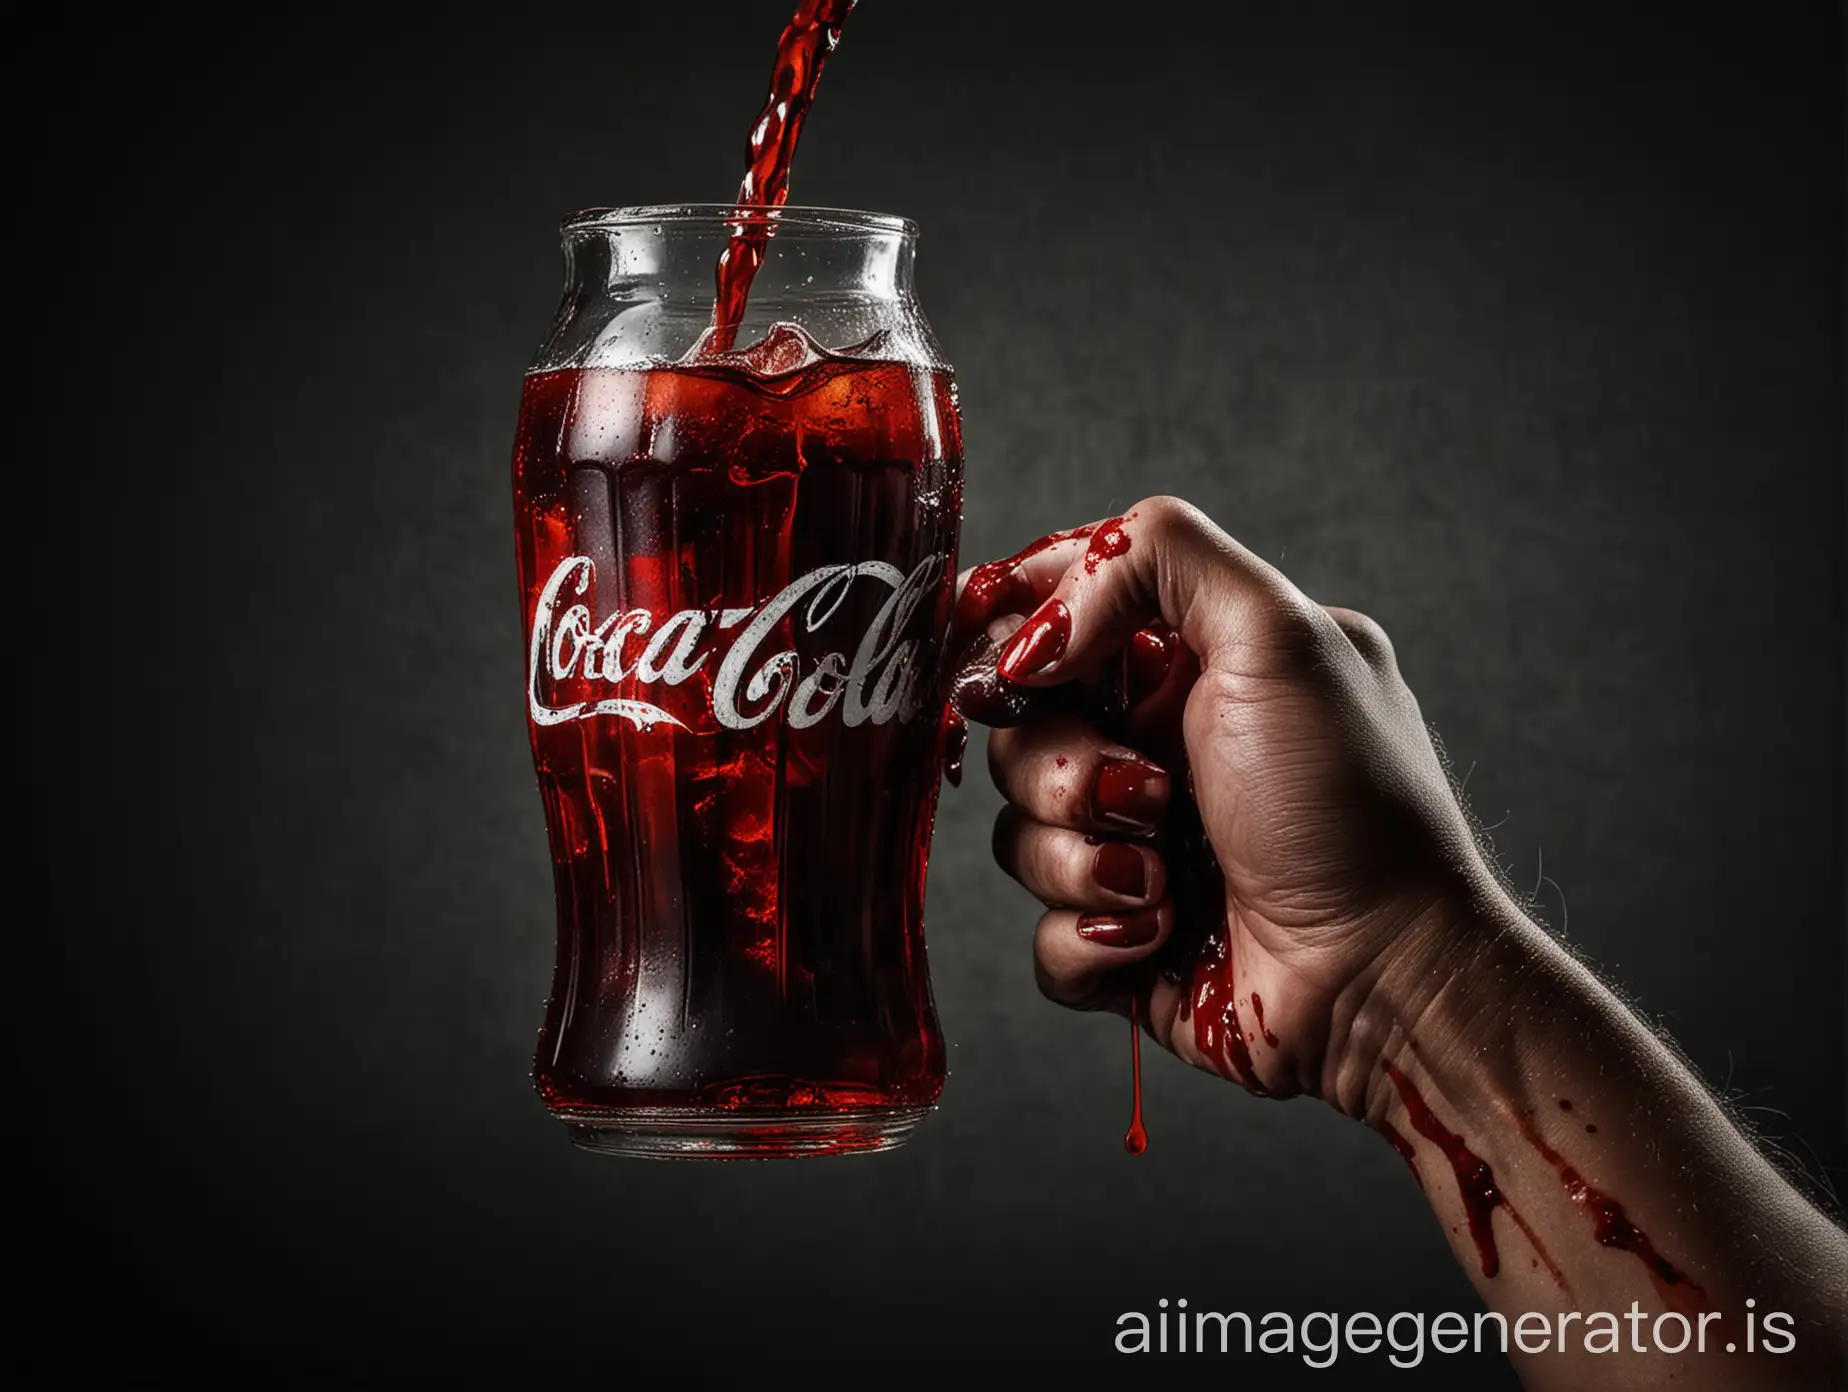 Bloody Coca Cola with a bloody hand holding it. Dark background. Photoshoot style.